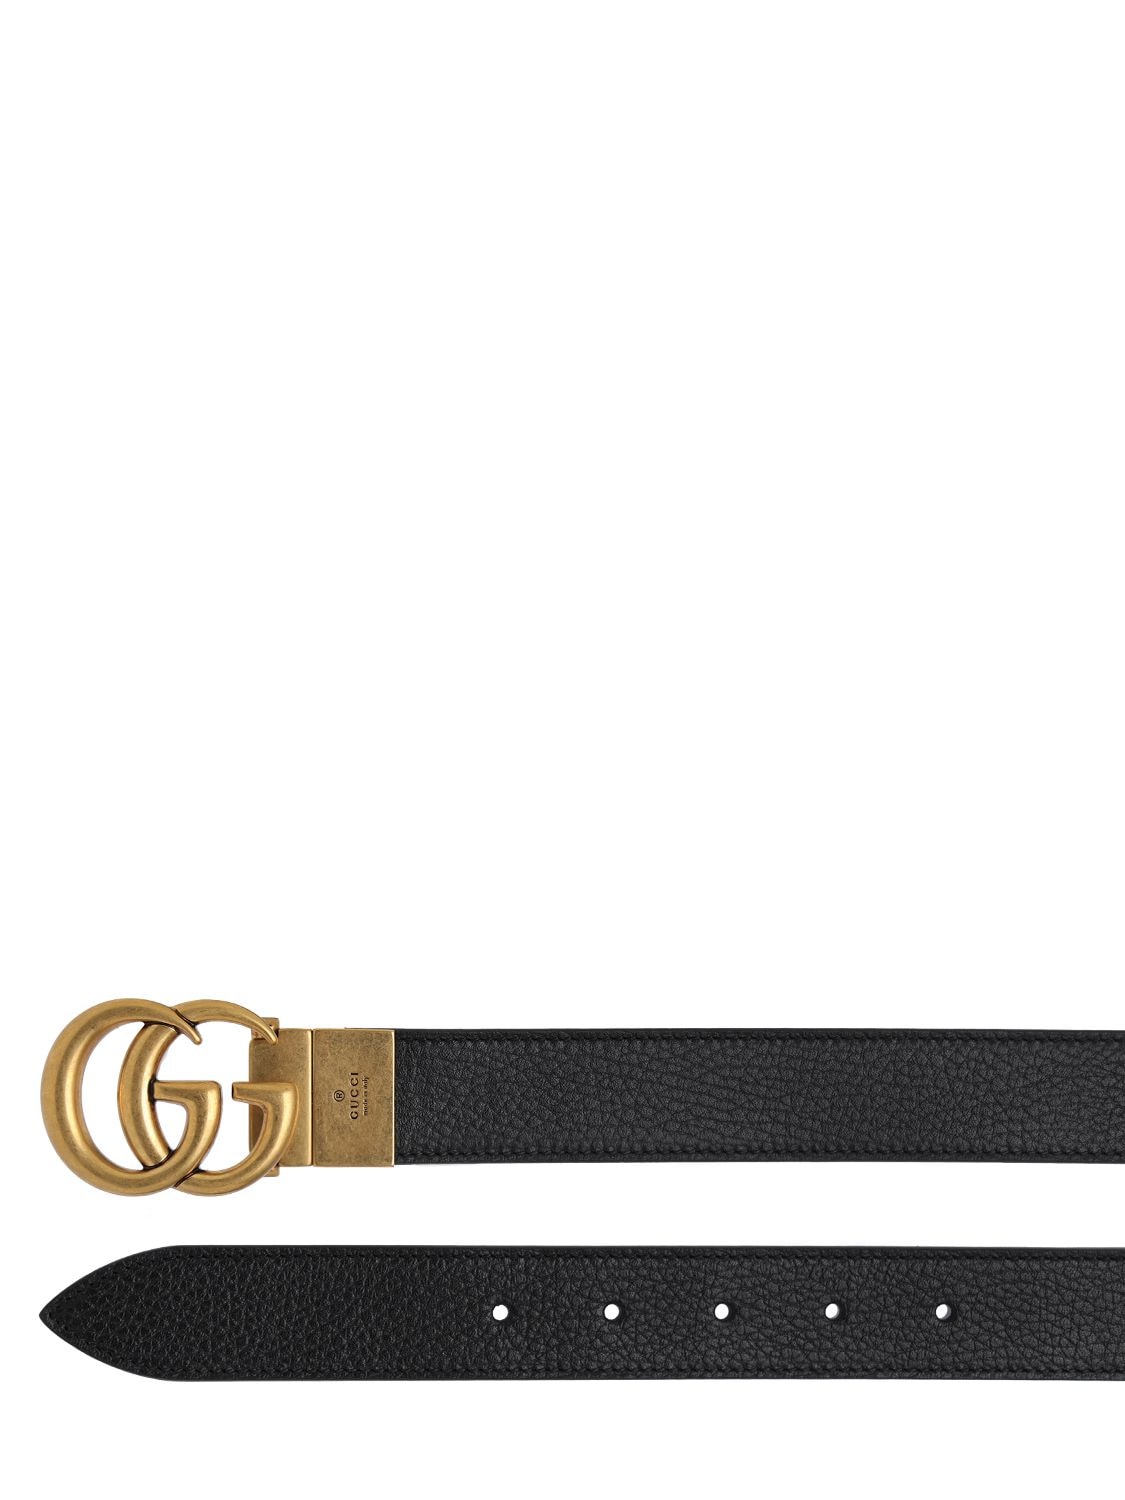 Shop Gucci 3cm Gg Reversible Leather Belt In Black,brown